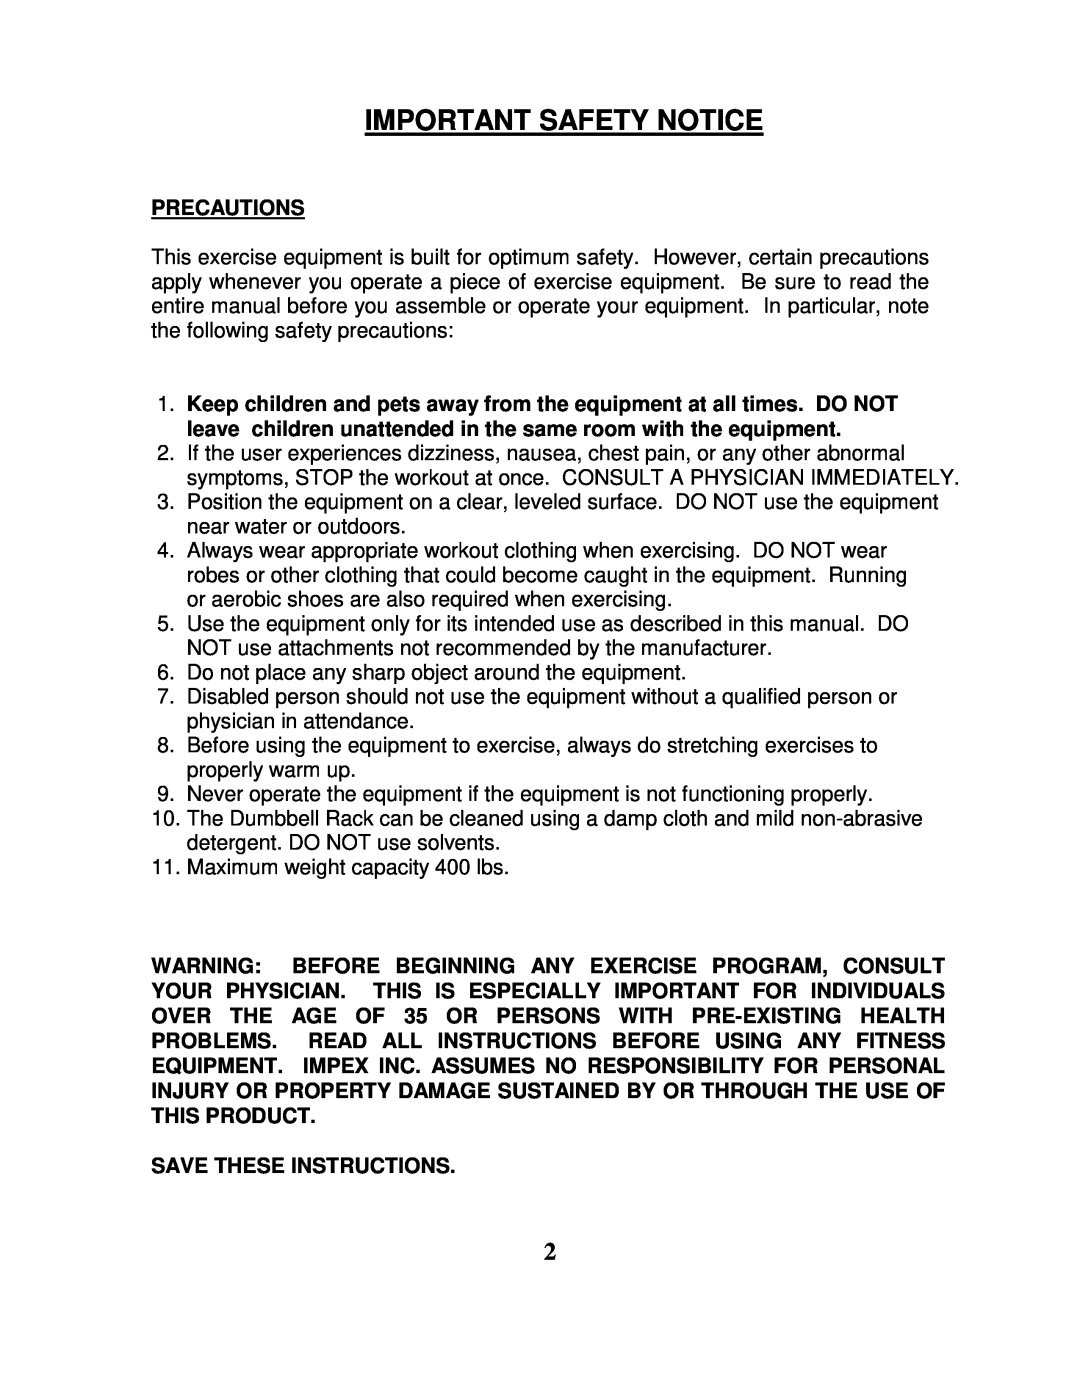 Impex IVK-402 manual Important Safety Notice, Precautions, Save These Instructions 